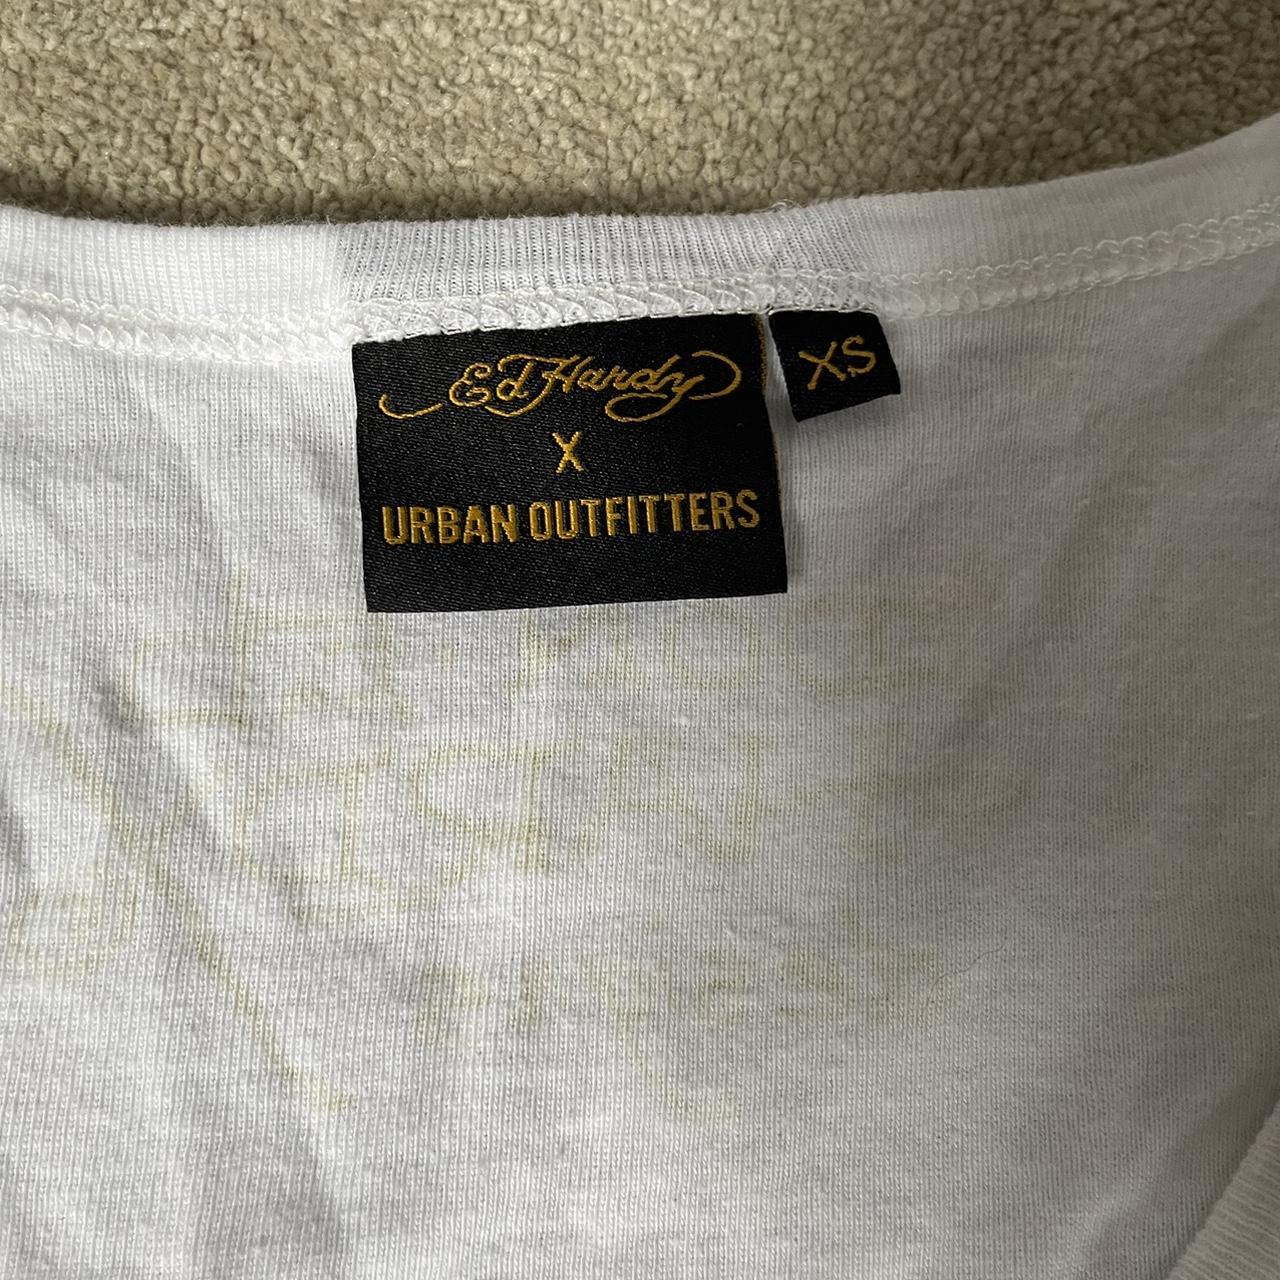 DONT BUY ed hardy x urban outfitters tank top size... - Depop